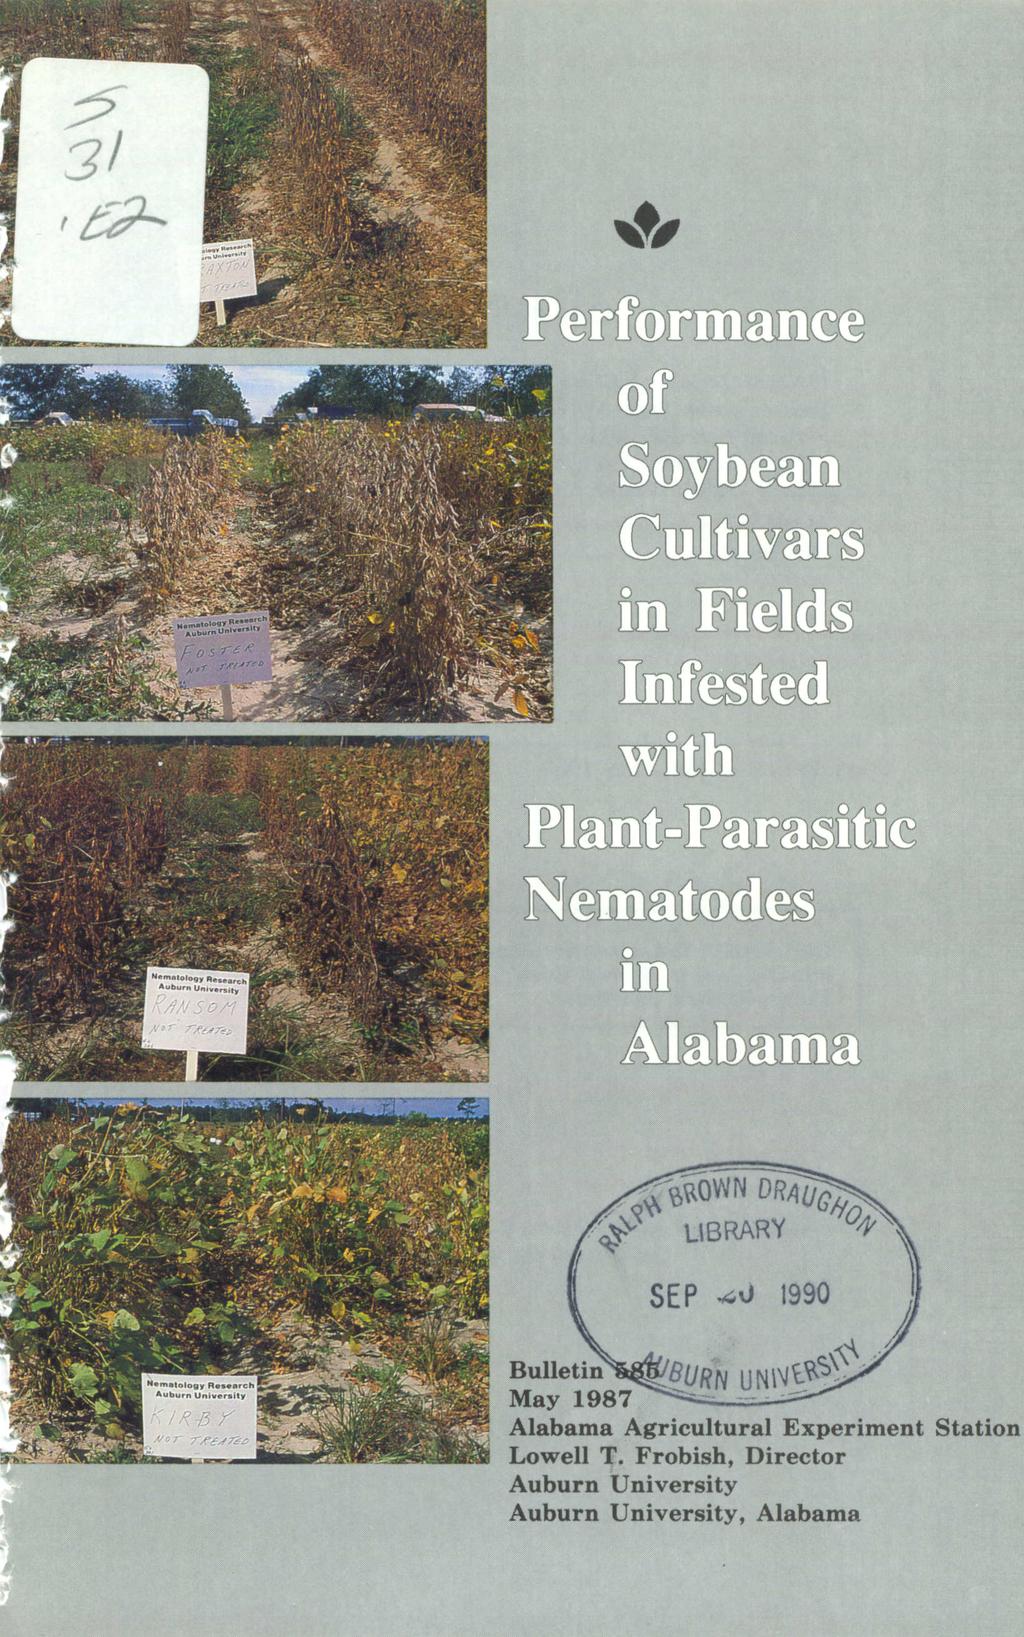 As..o-5- YM t 3 ' Bulletin b f "1VRI May 1987 Alabama Agricultural Experiment